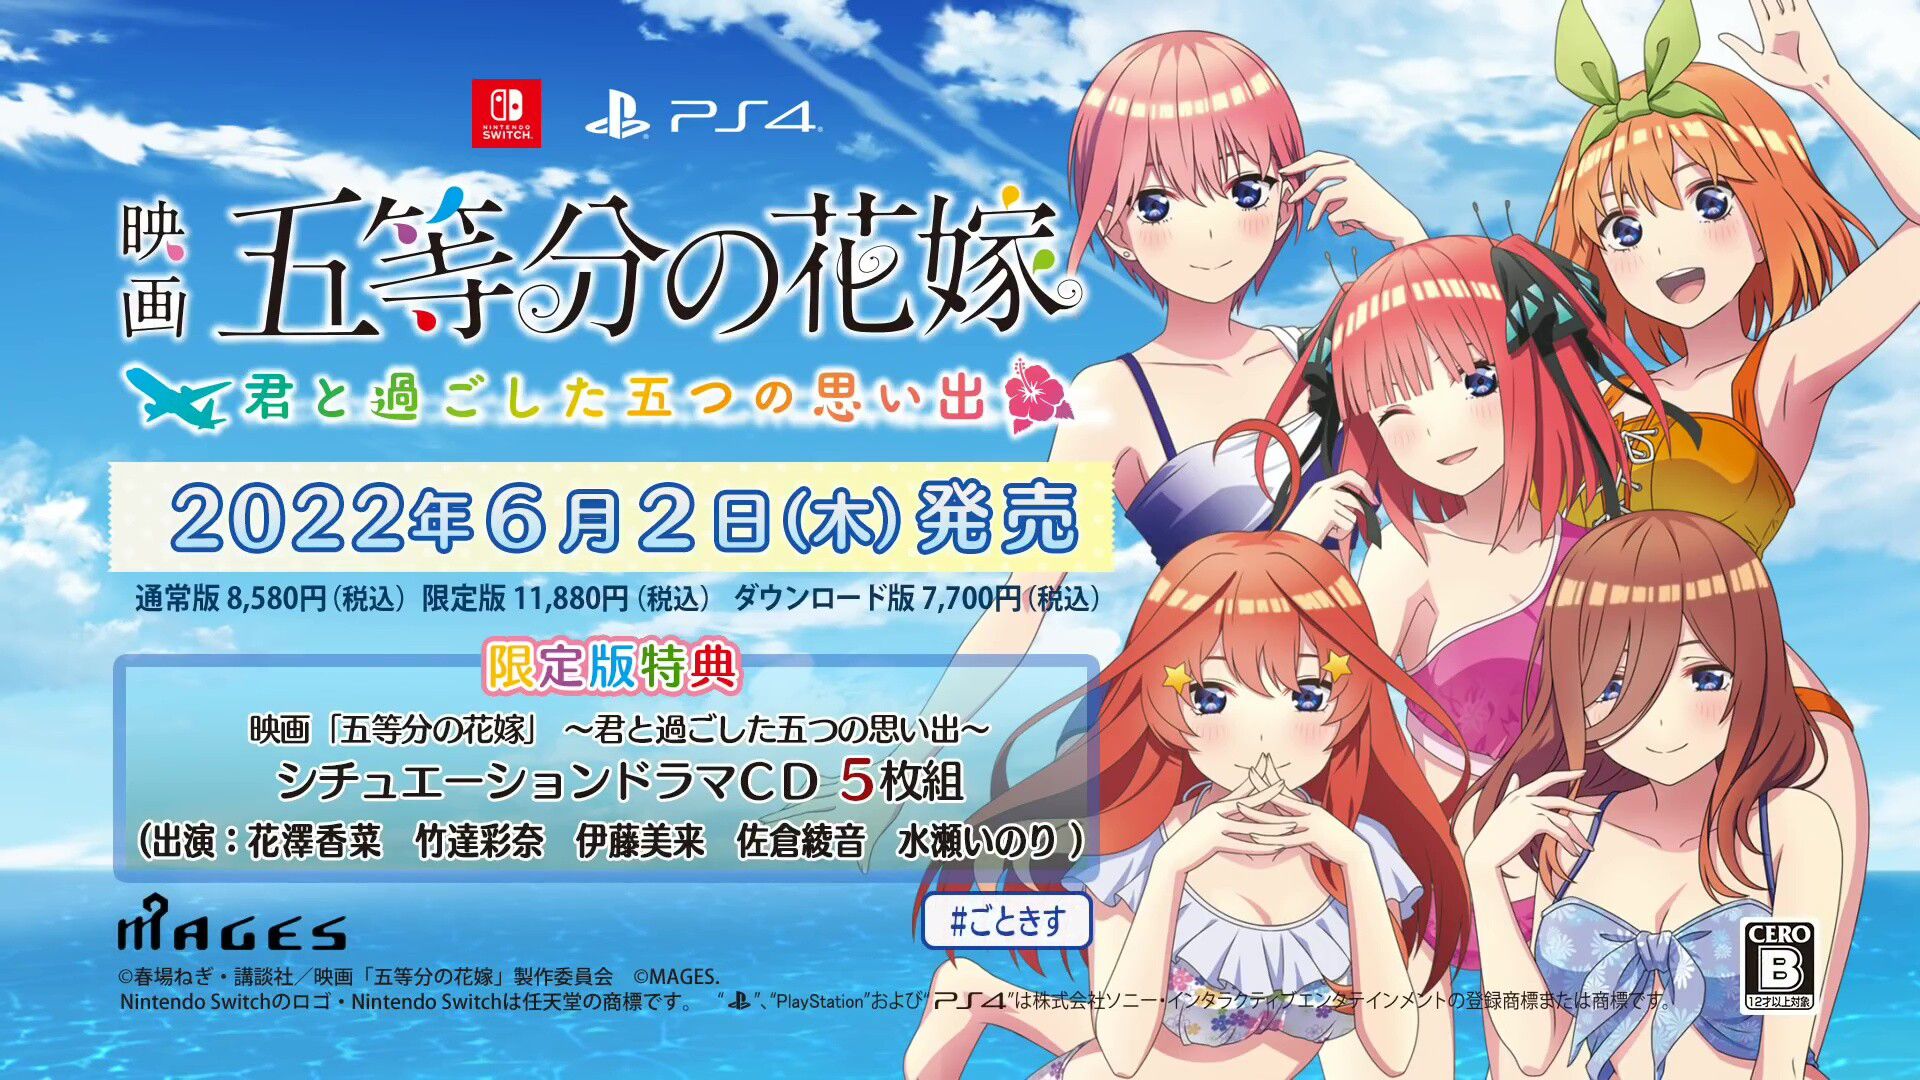 PS4 / Switch "Movie "Five Memories Of Five Equals" - Five Memories Spent With You" Girls' Erotic Swimsuits, etc. 41